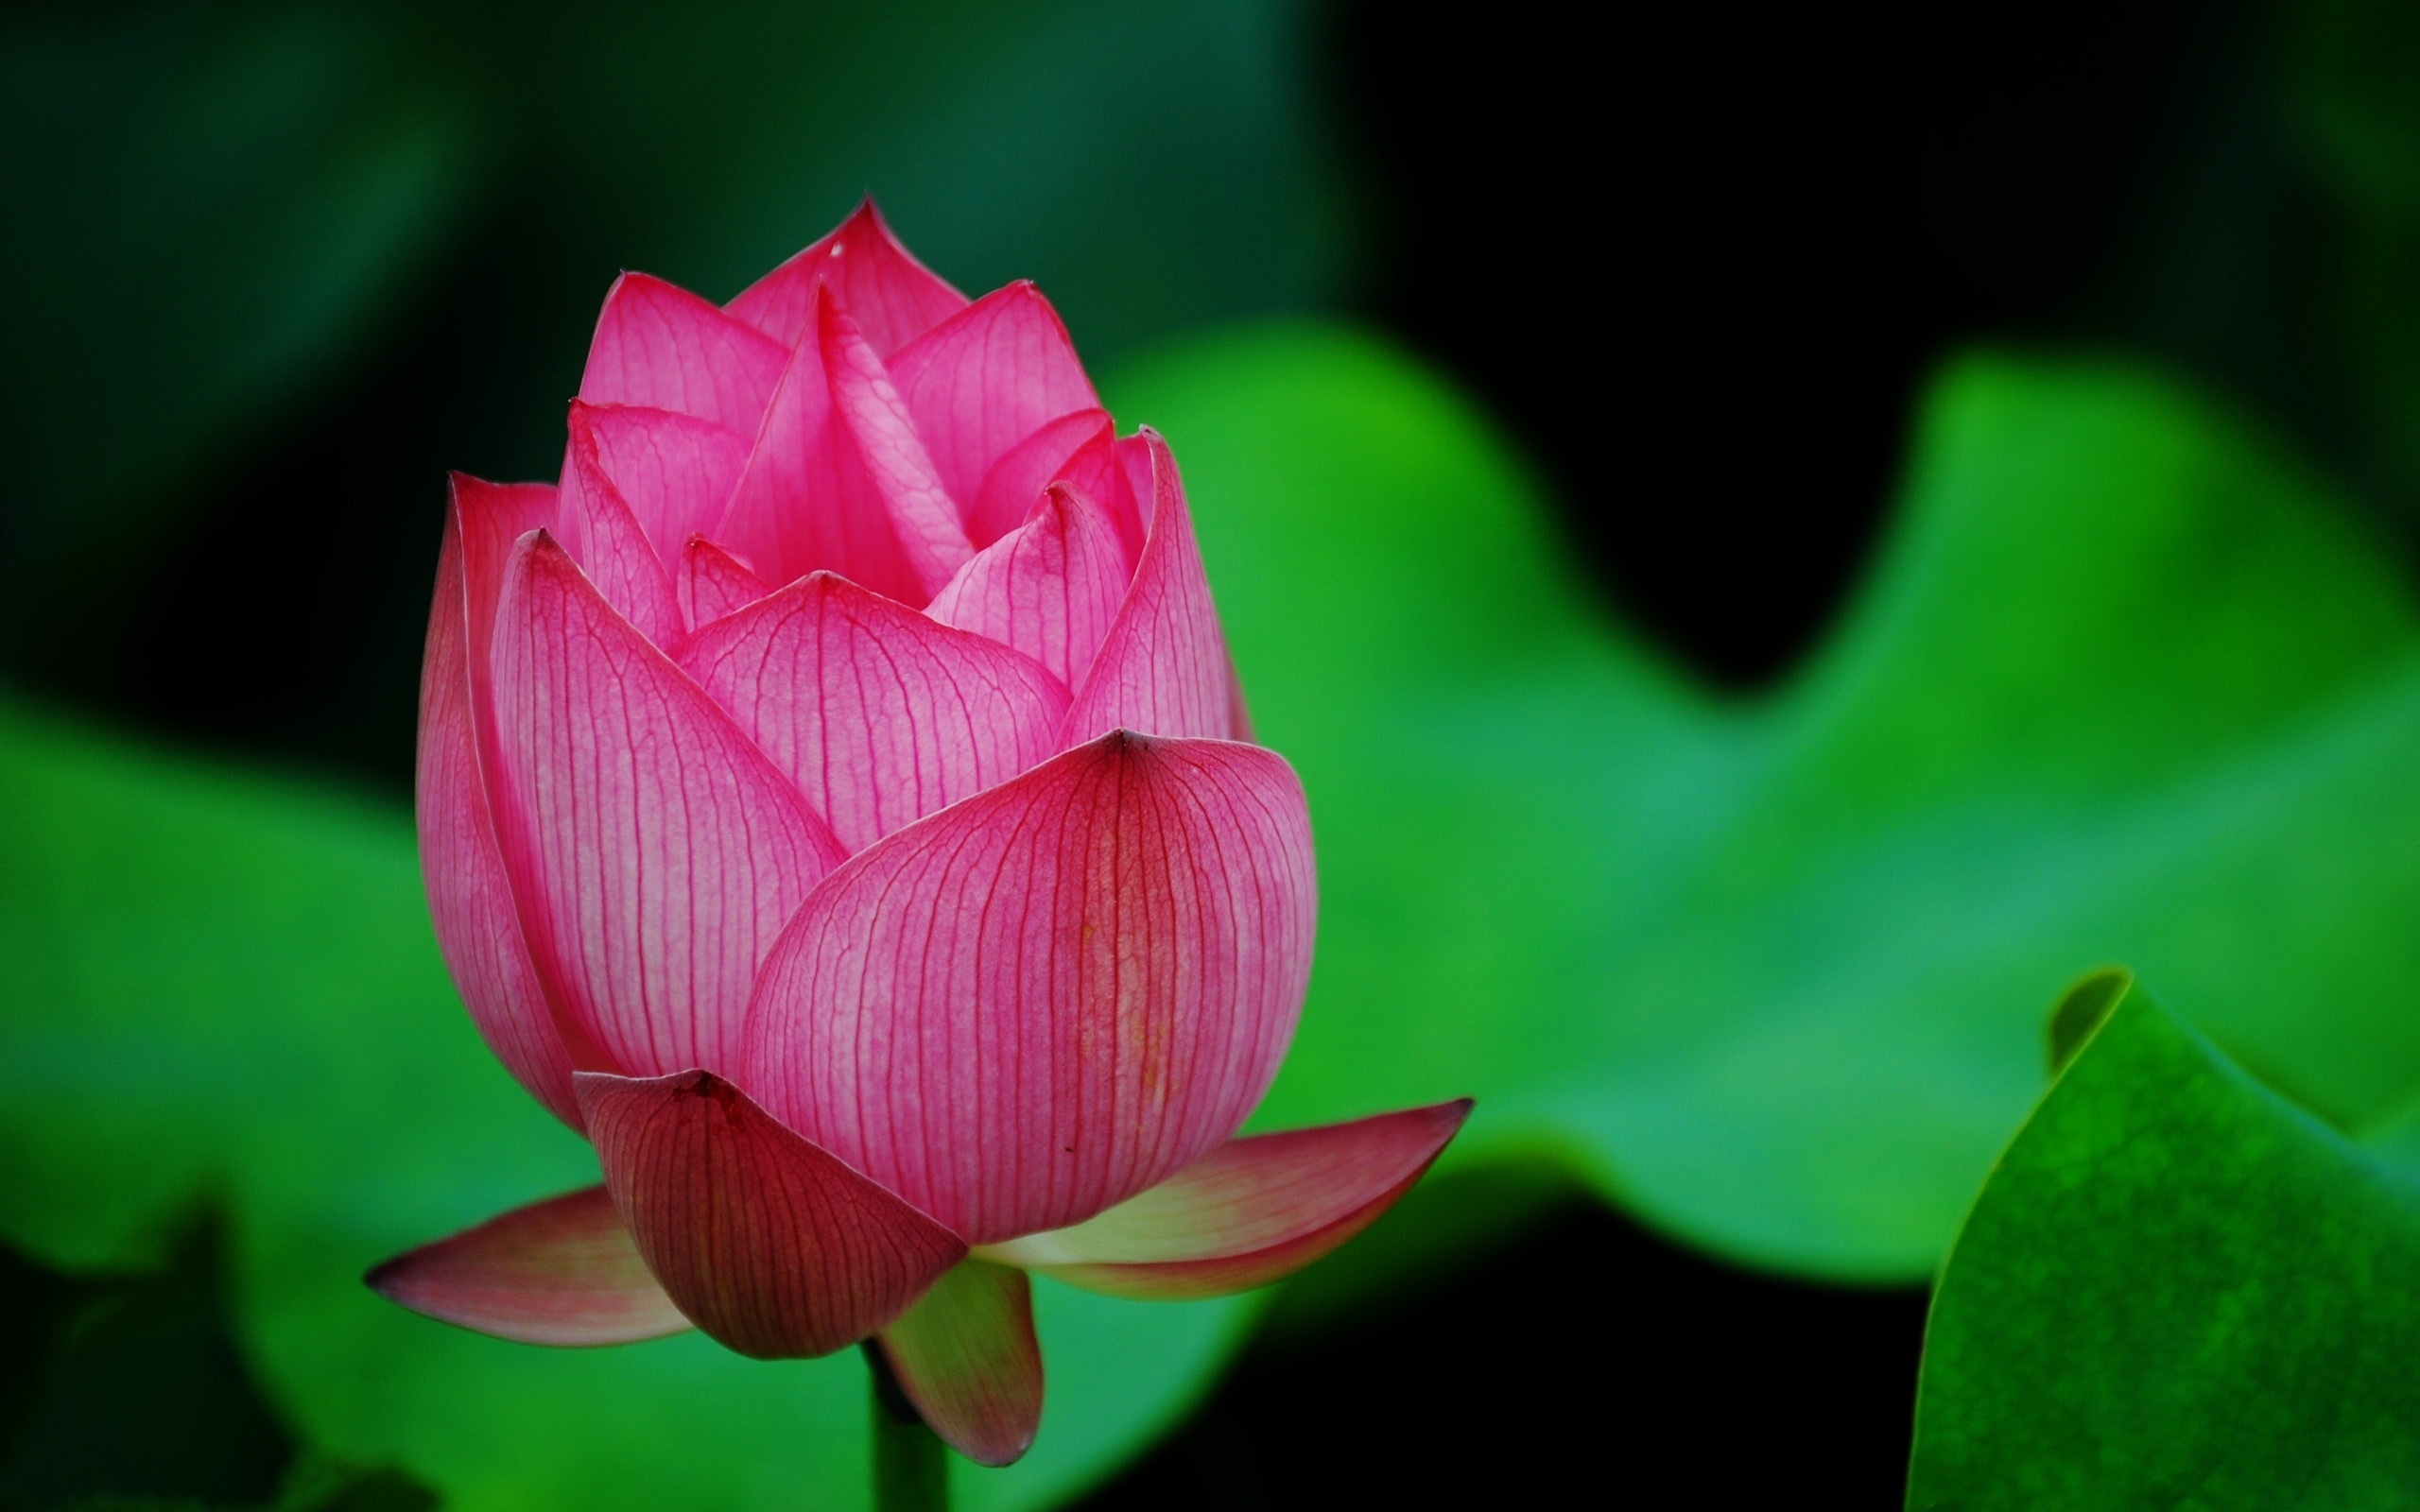 Hd Image Of Mountain And Lotus Flower Pics Widescreen Blooming ...